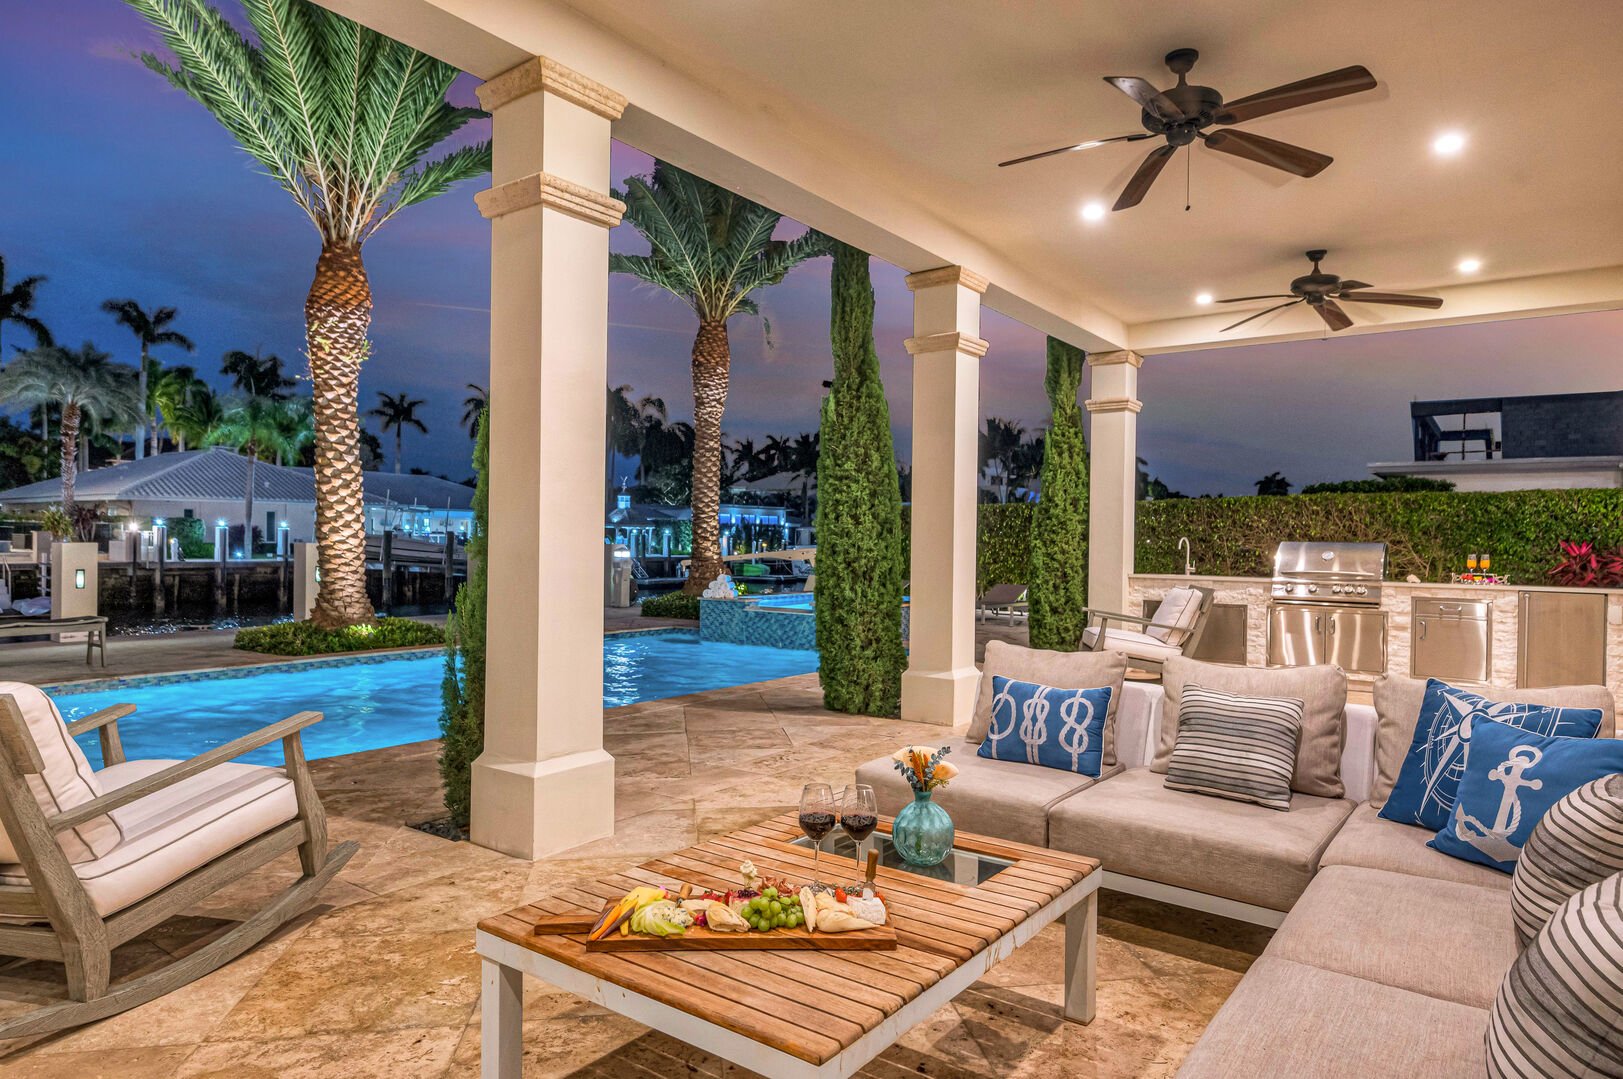 Covered patio features a grill and a seating area with its TV.